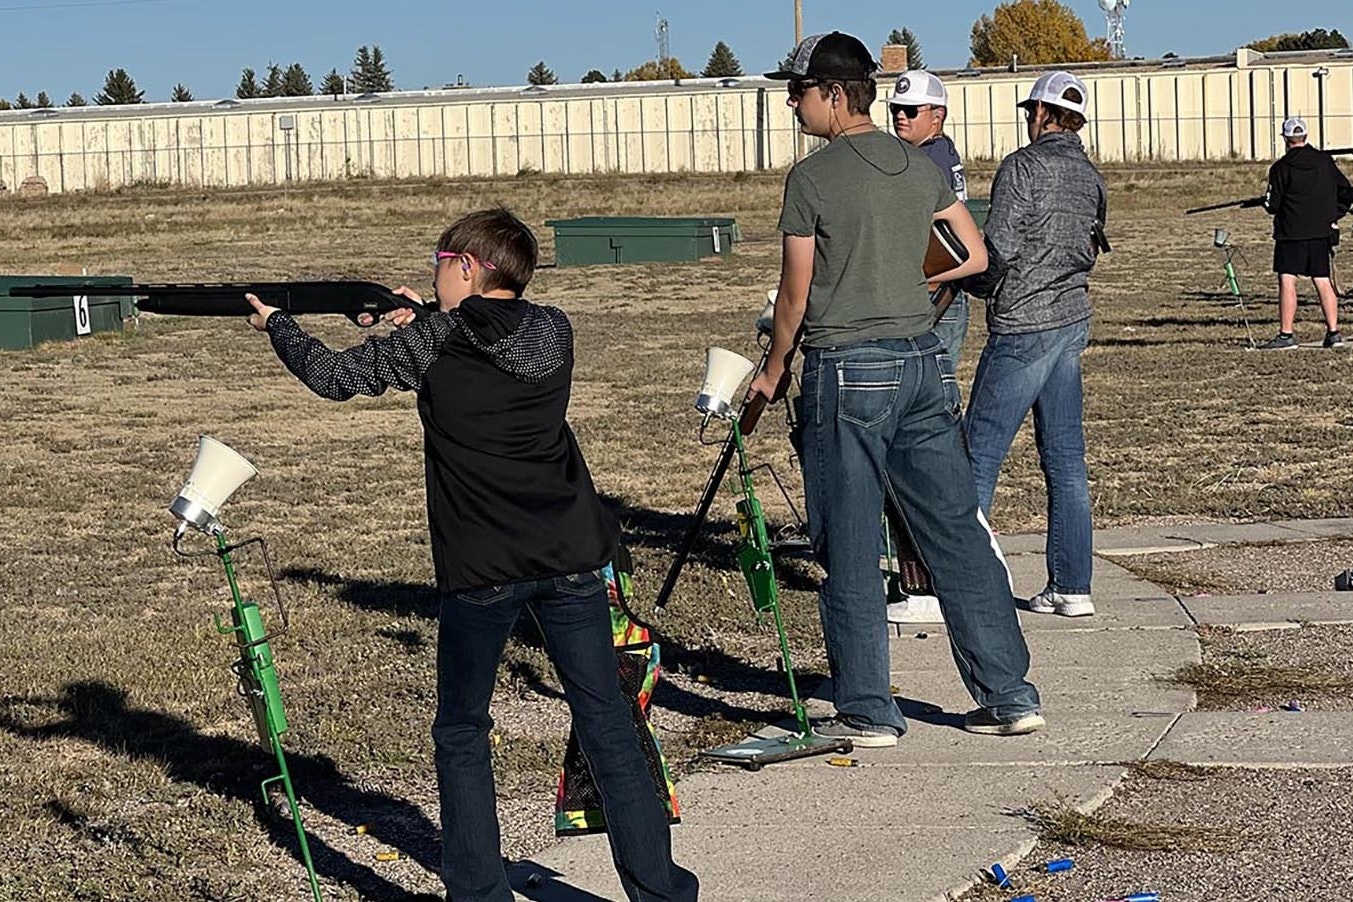 The Cheyenne East High School clay target team practices at a local range.